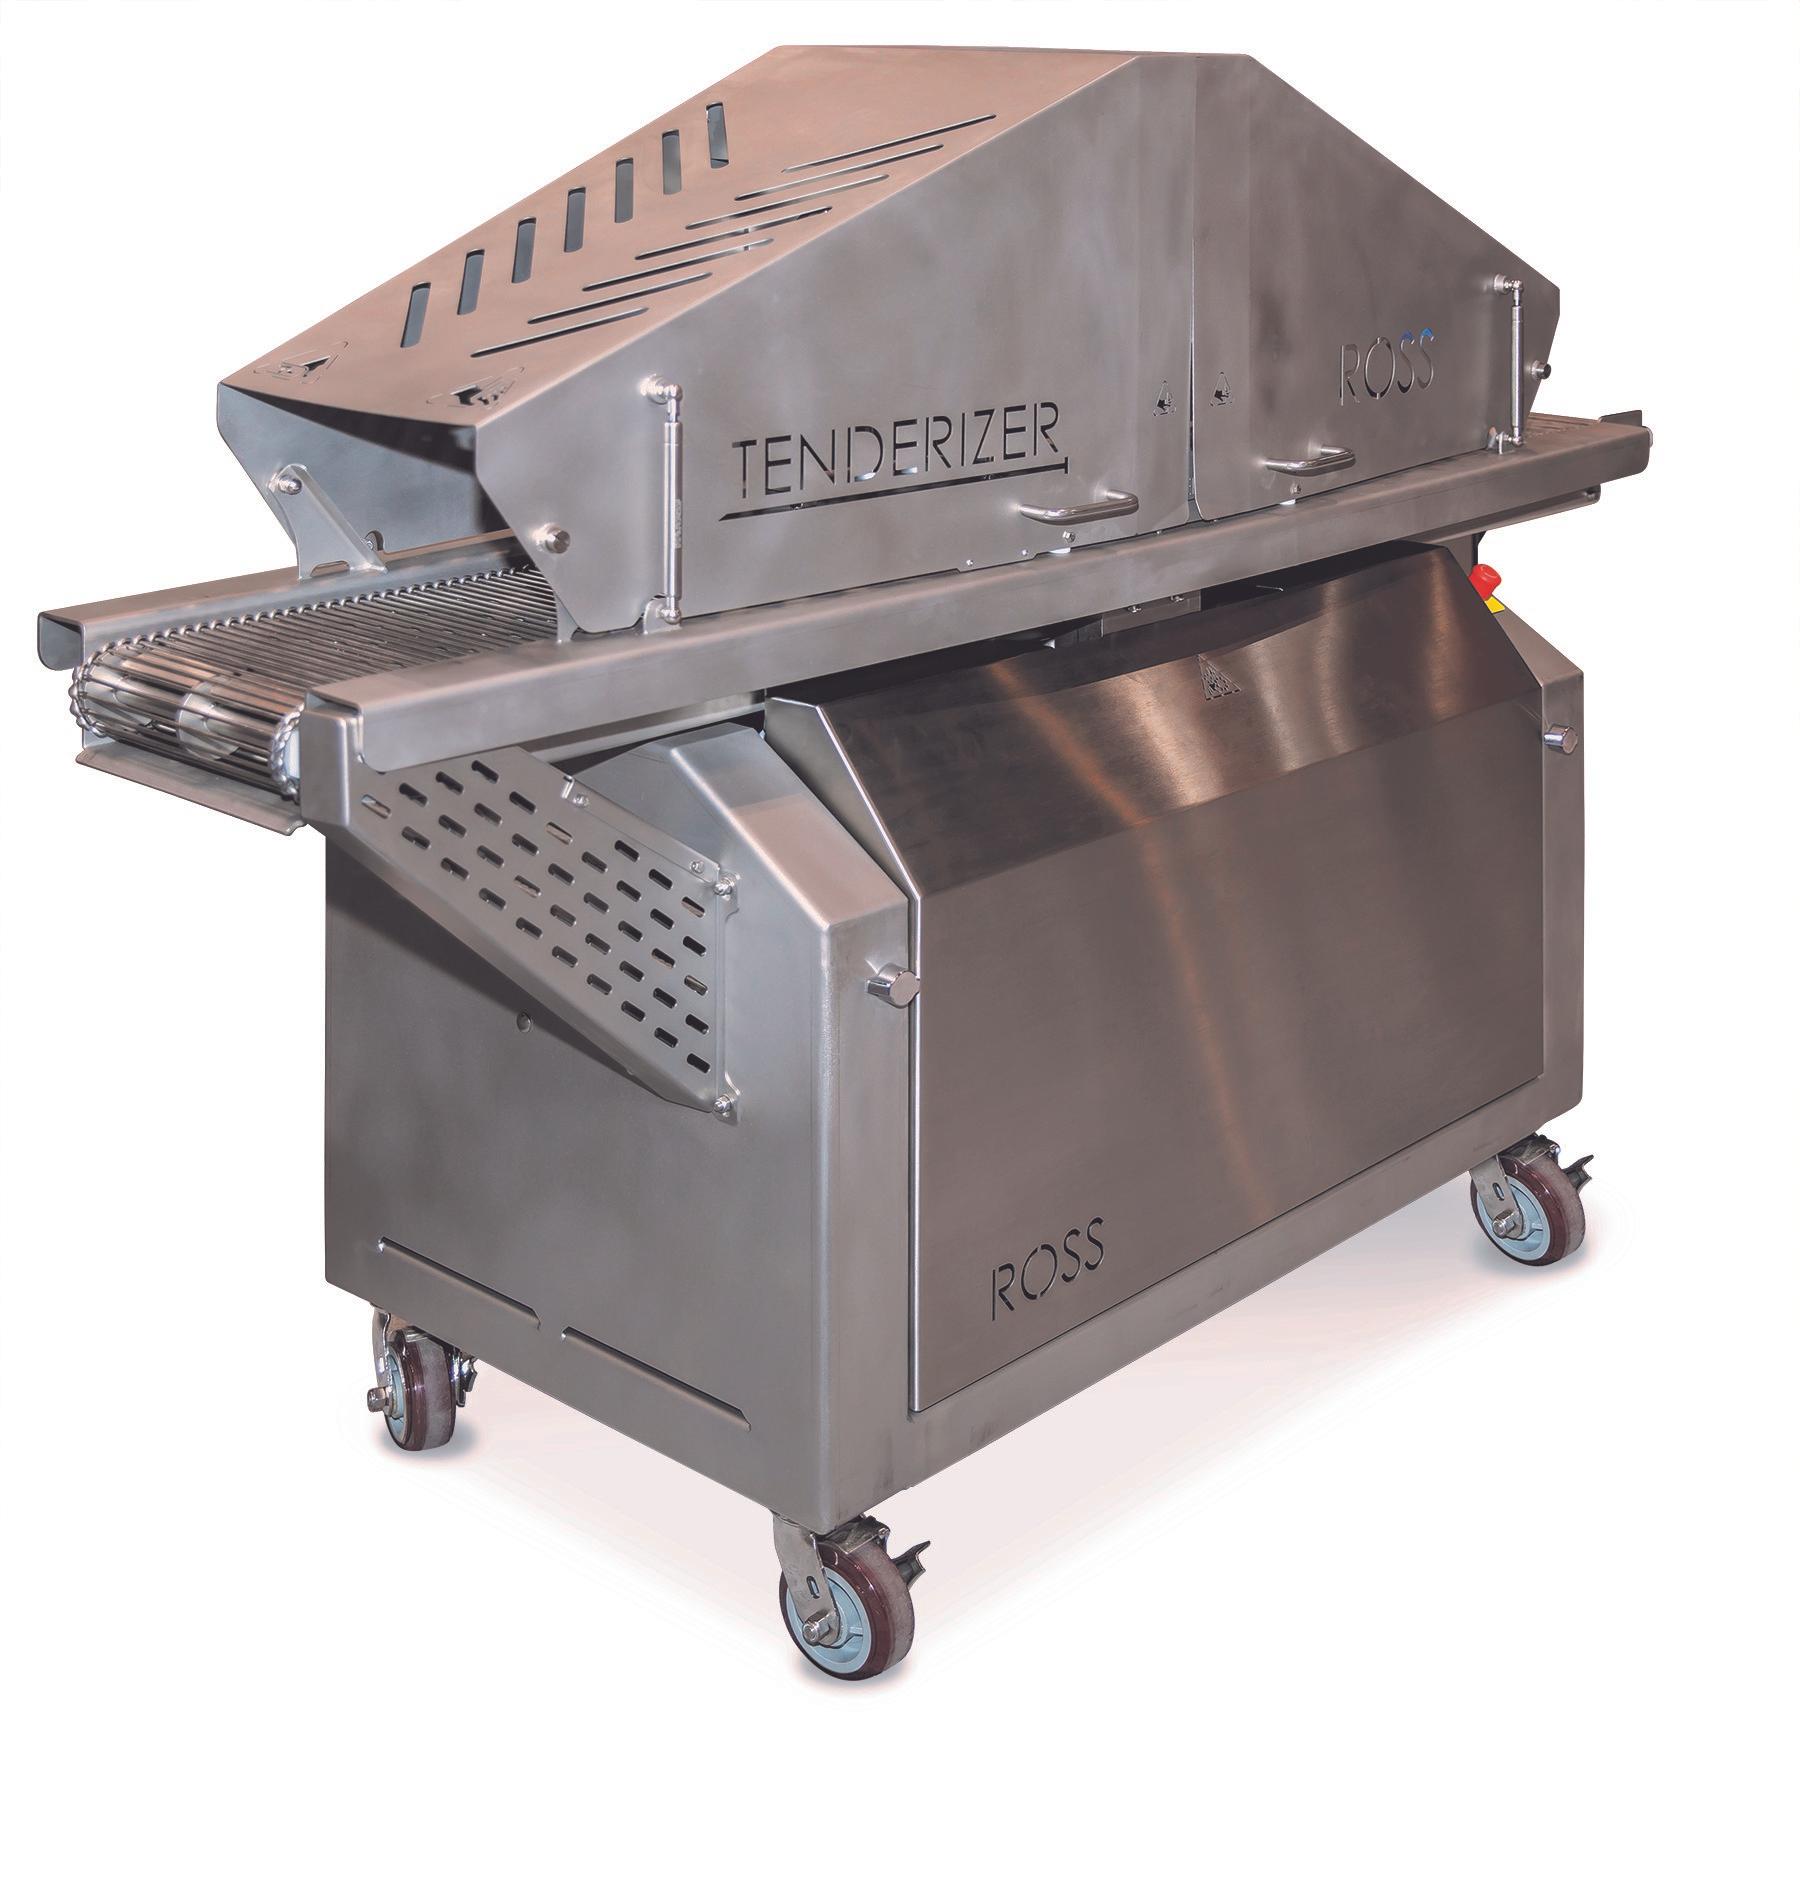 Product Ross TC810 Tenderizer - Ross Industries image